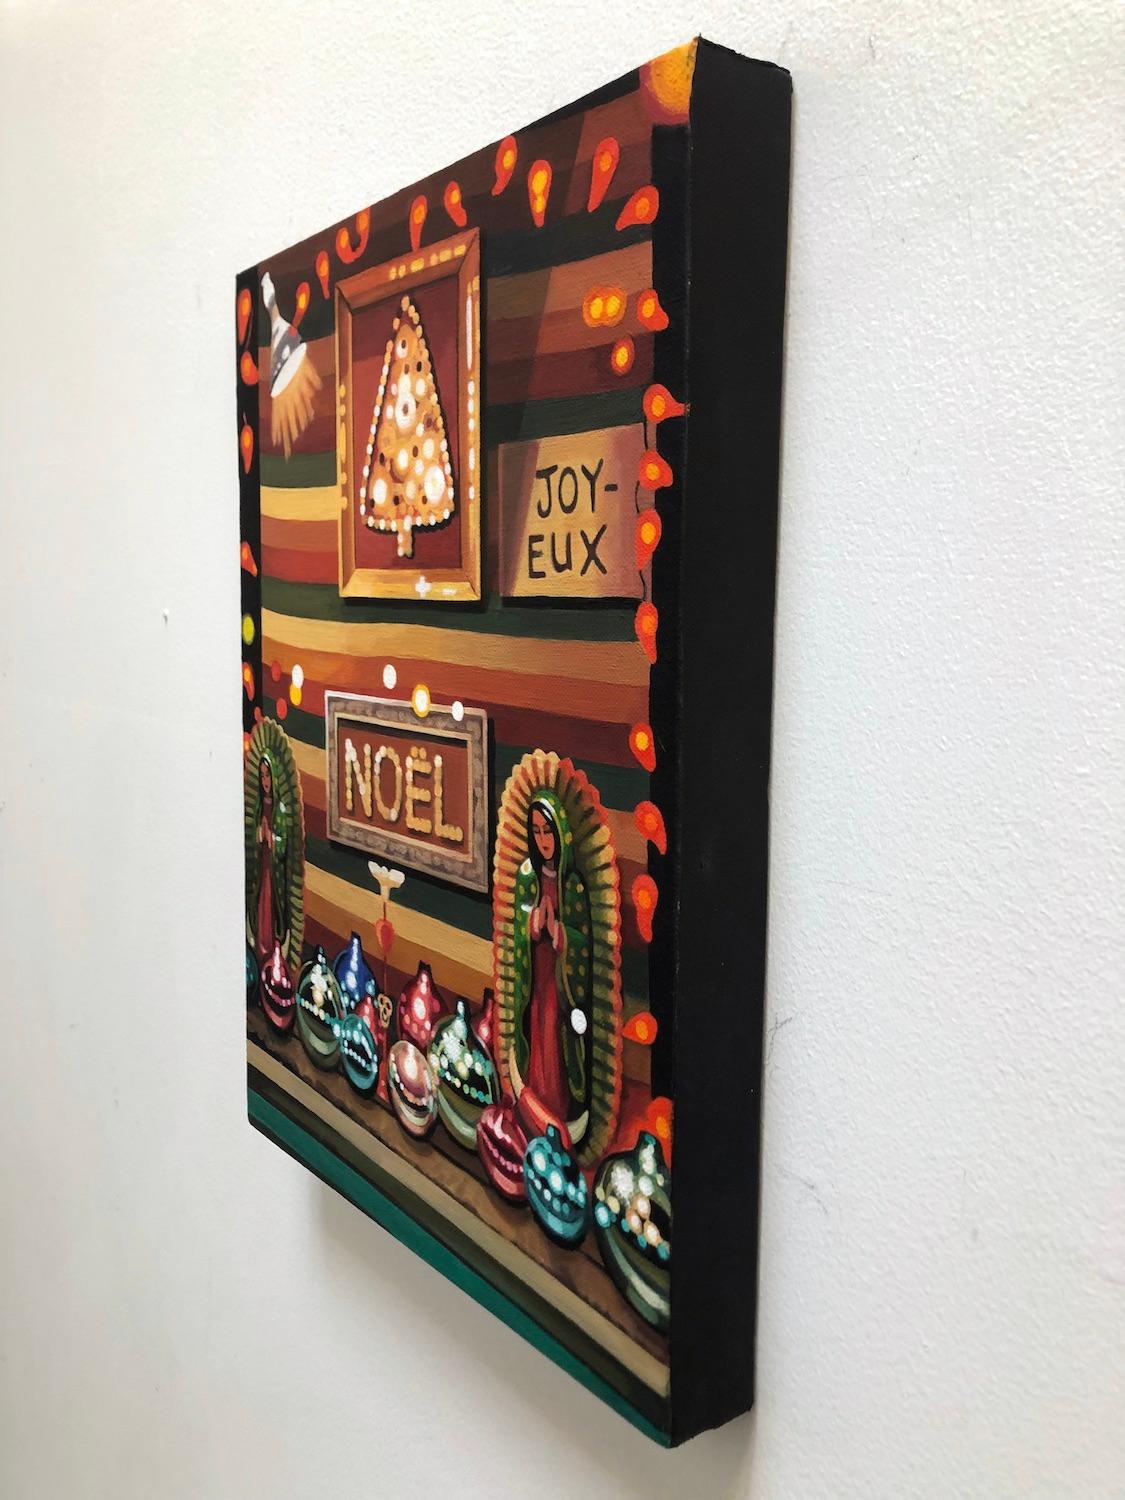 <p>Artist Comments<br>Festive holiday ornaments spread out in artist Hadley Northrop's jubilant impressionist rendering. A window display of a store in Los Angeles during the yuletide, the kind of still life that catches the painter's eye. Light